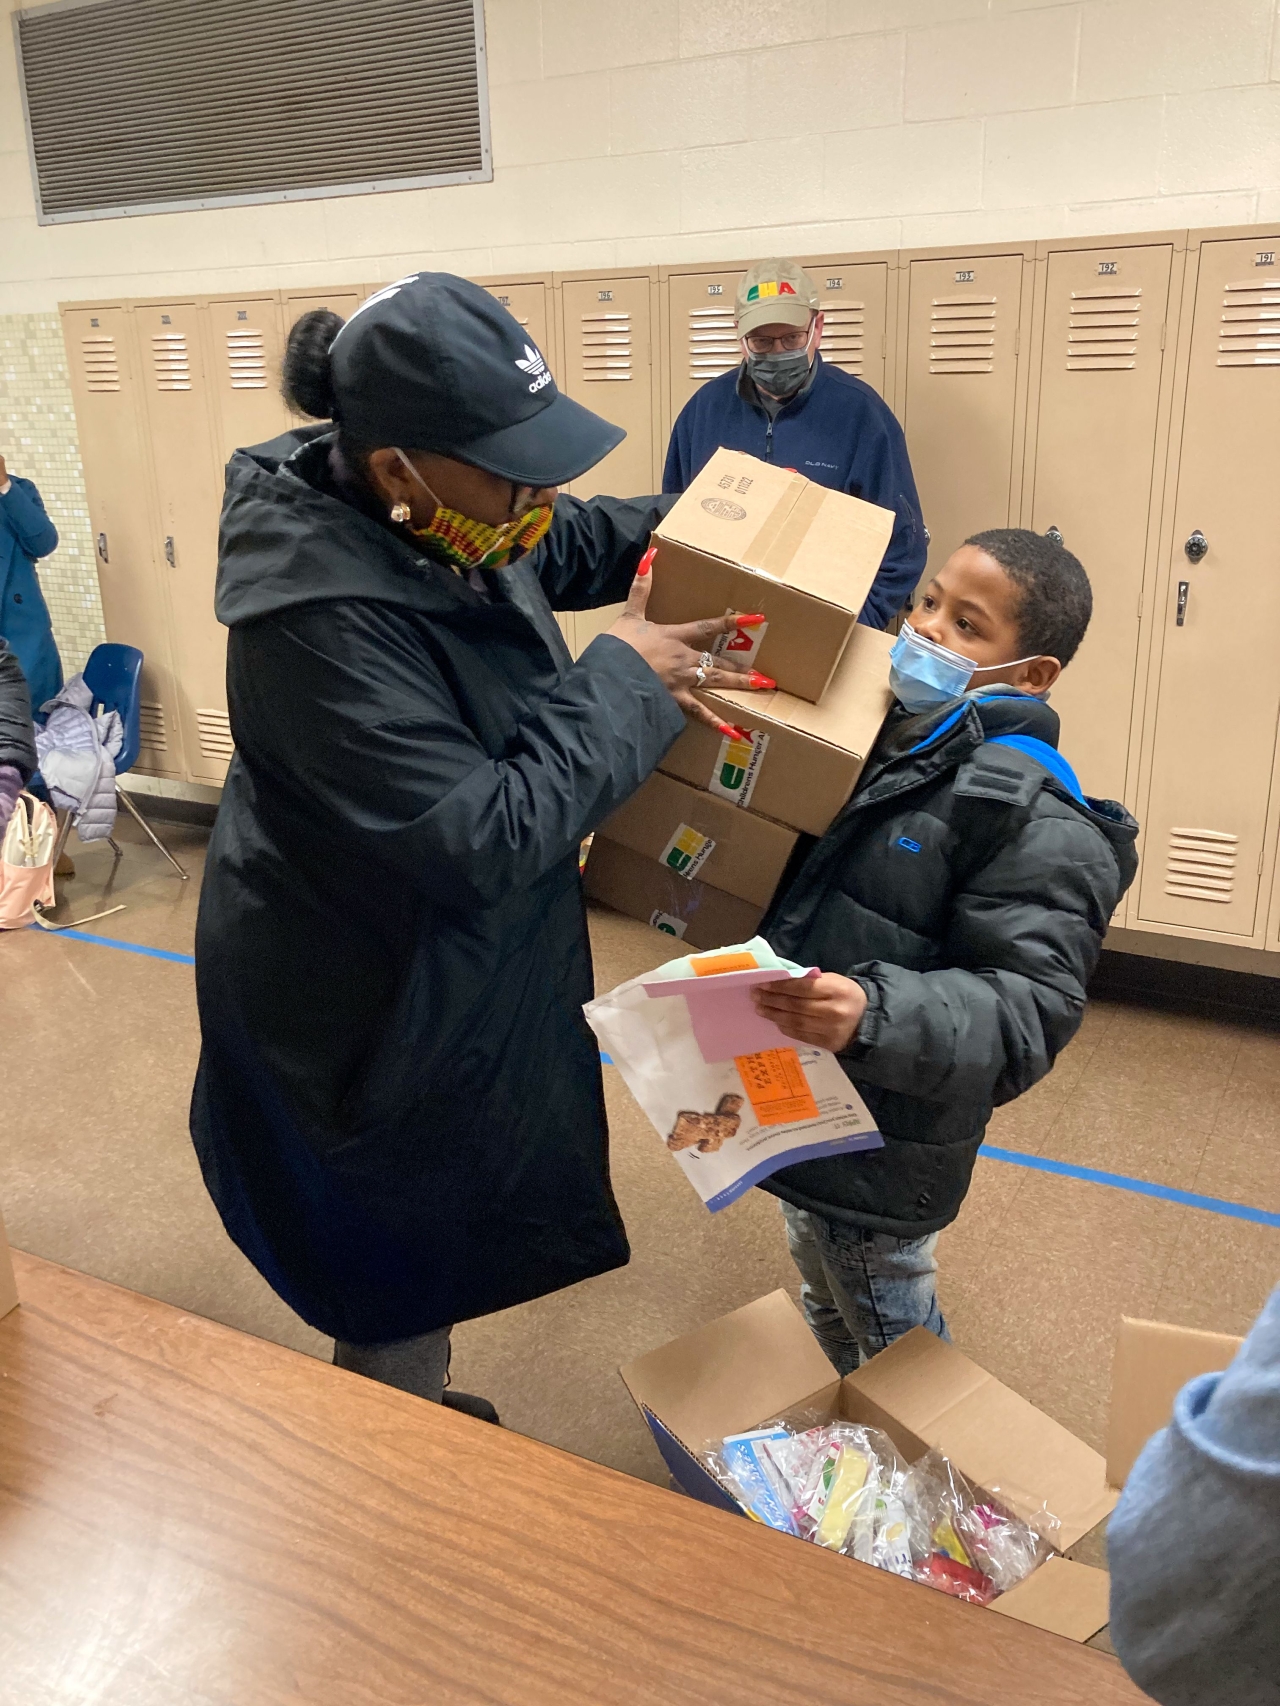 Representative Humphrey collaborates with Child Hunger Alliance to pass out weekend meal kits to children at Moler Elementary